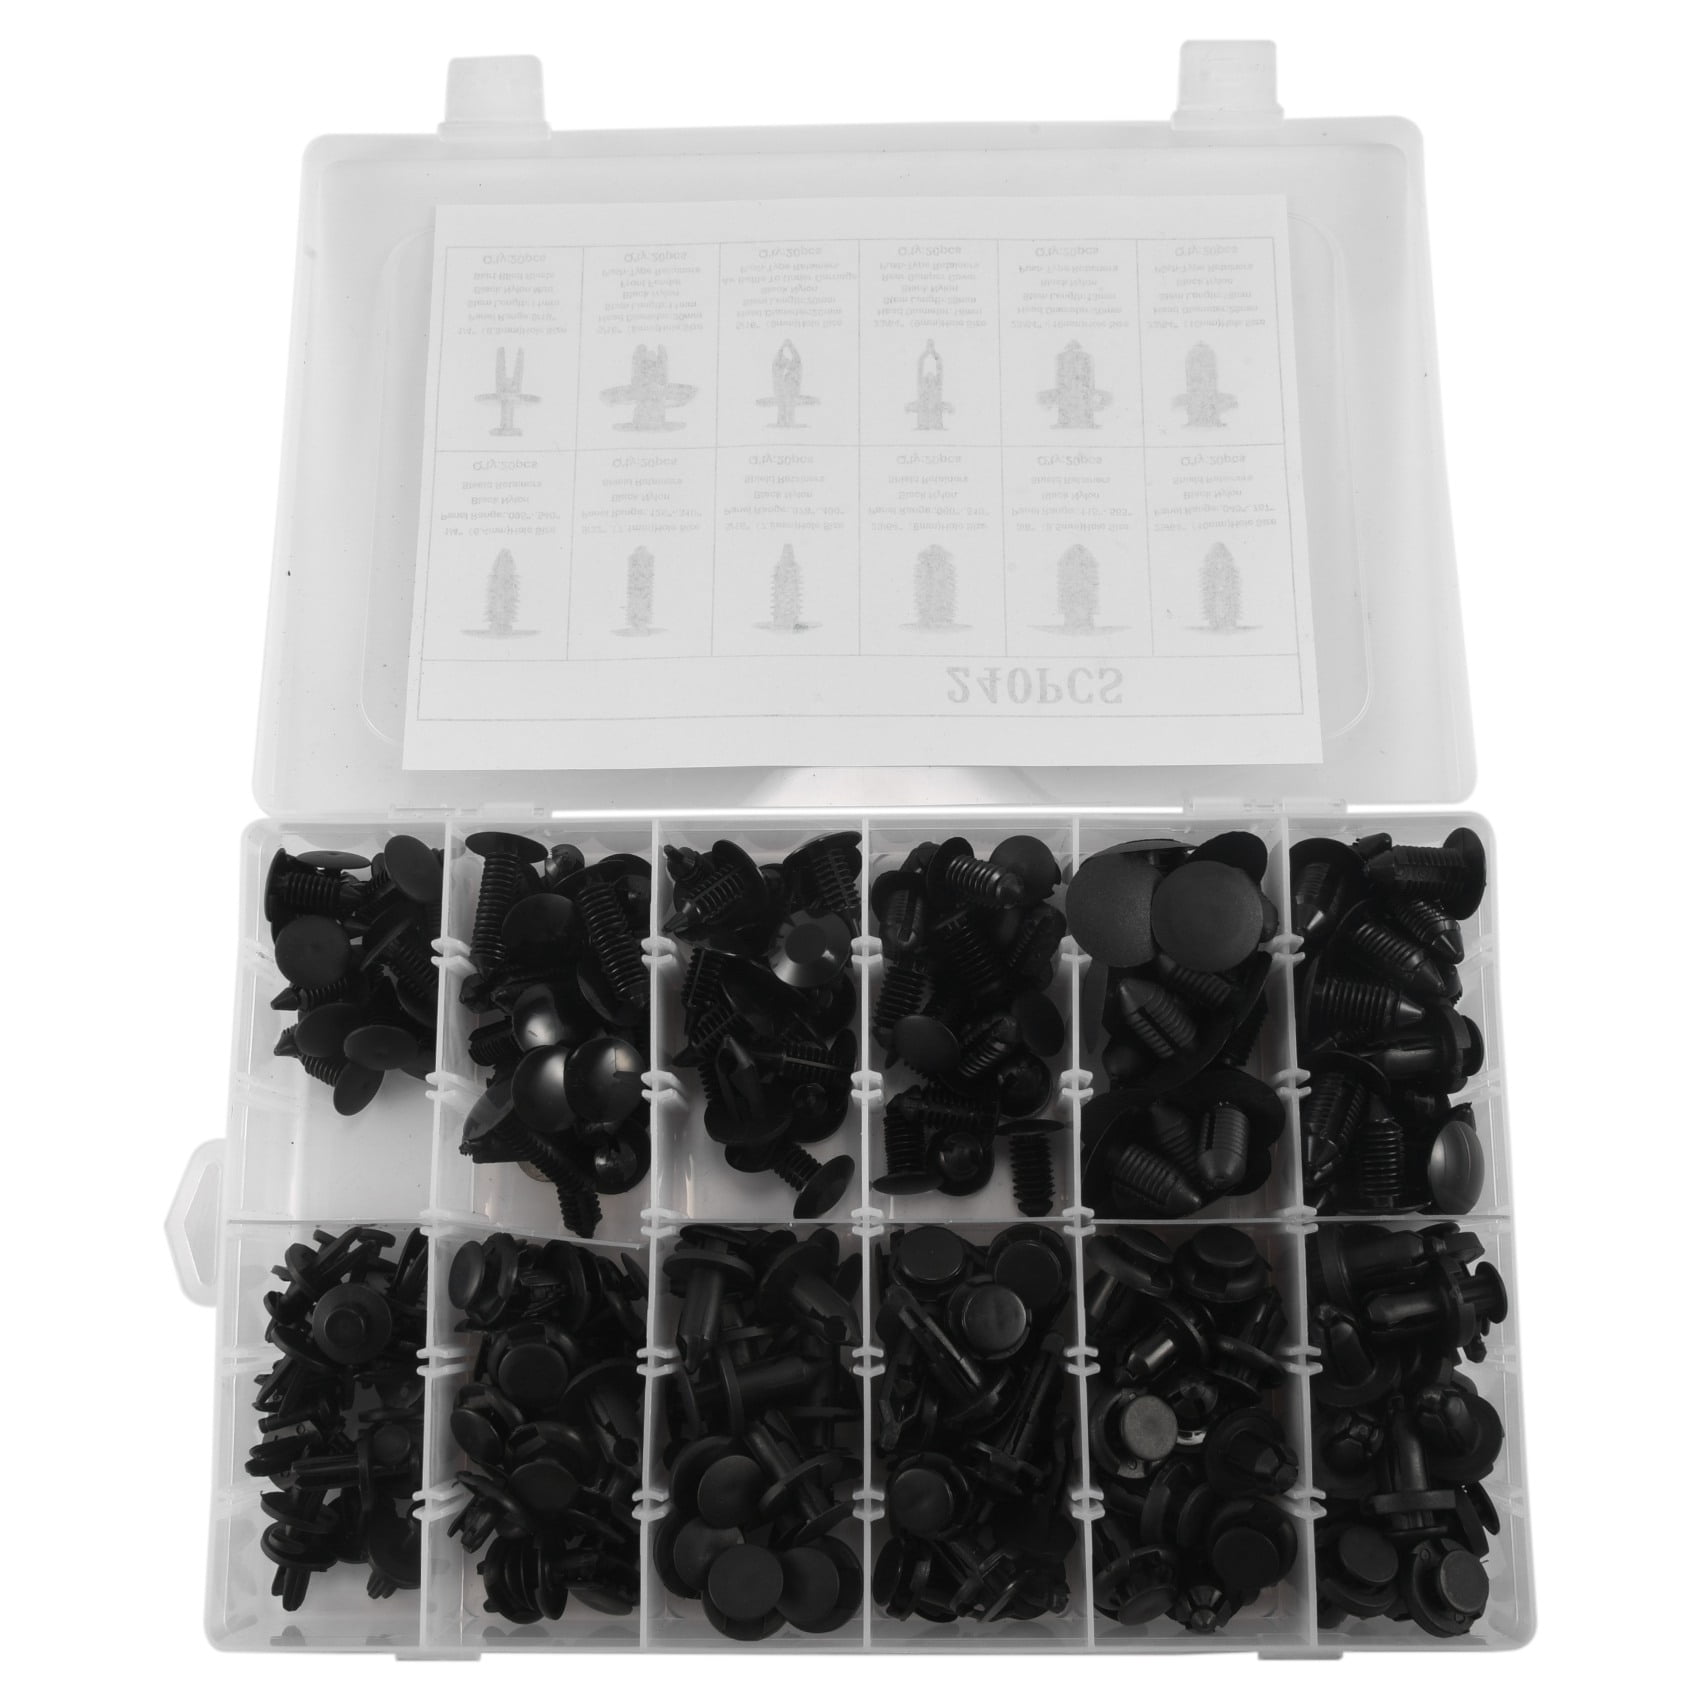 19 Most Popular Sizes Auto Push Pin Rivets Set Uolor 456 Pcs Car Retainer Clips & Plastic Fasteners Kit with Fastener Remover Bumper Door Trim Panel Clips Assortment 